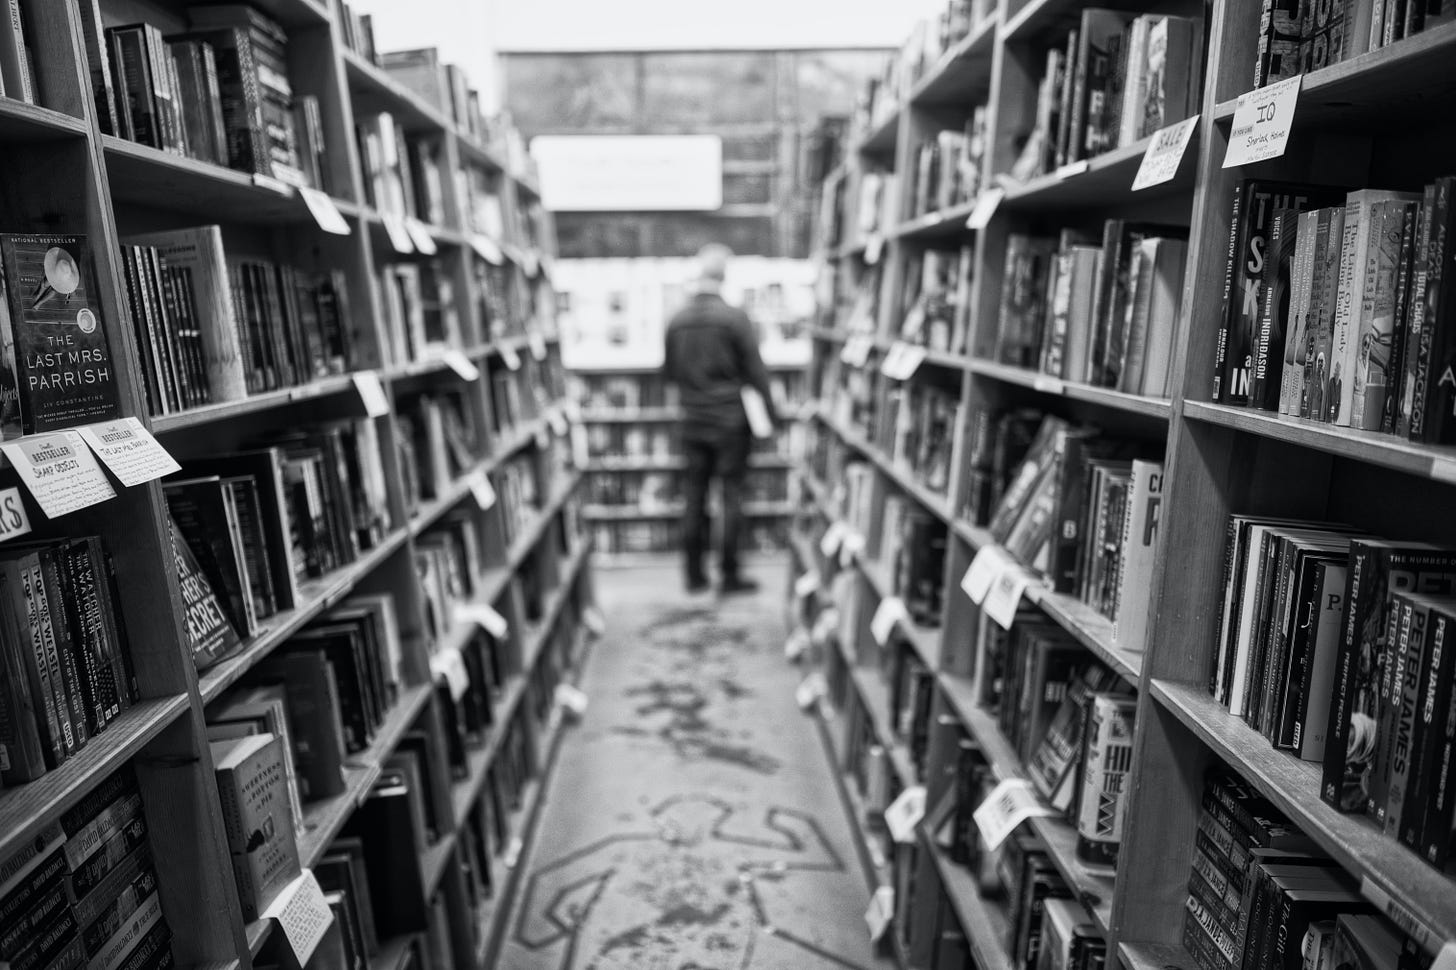 Image of the stacks at Powell's Bookstore